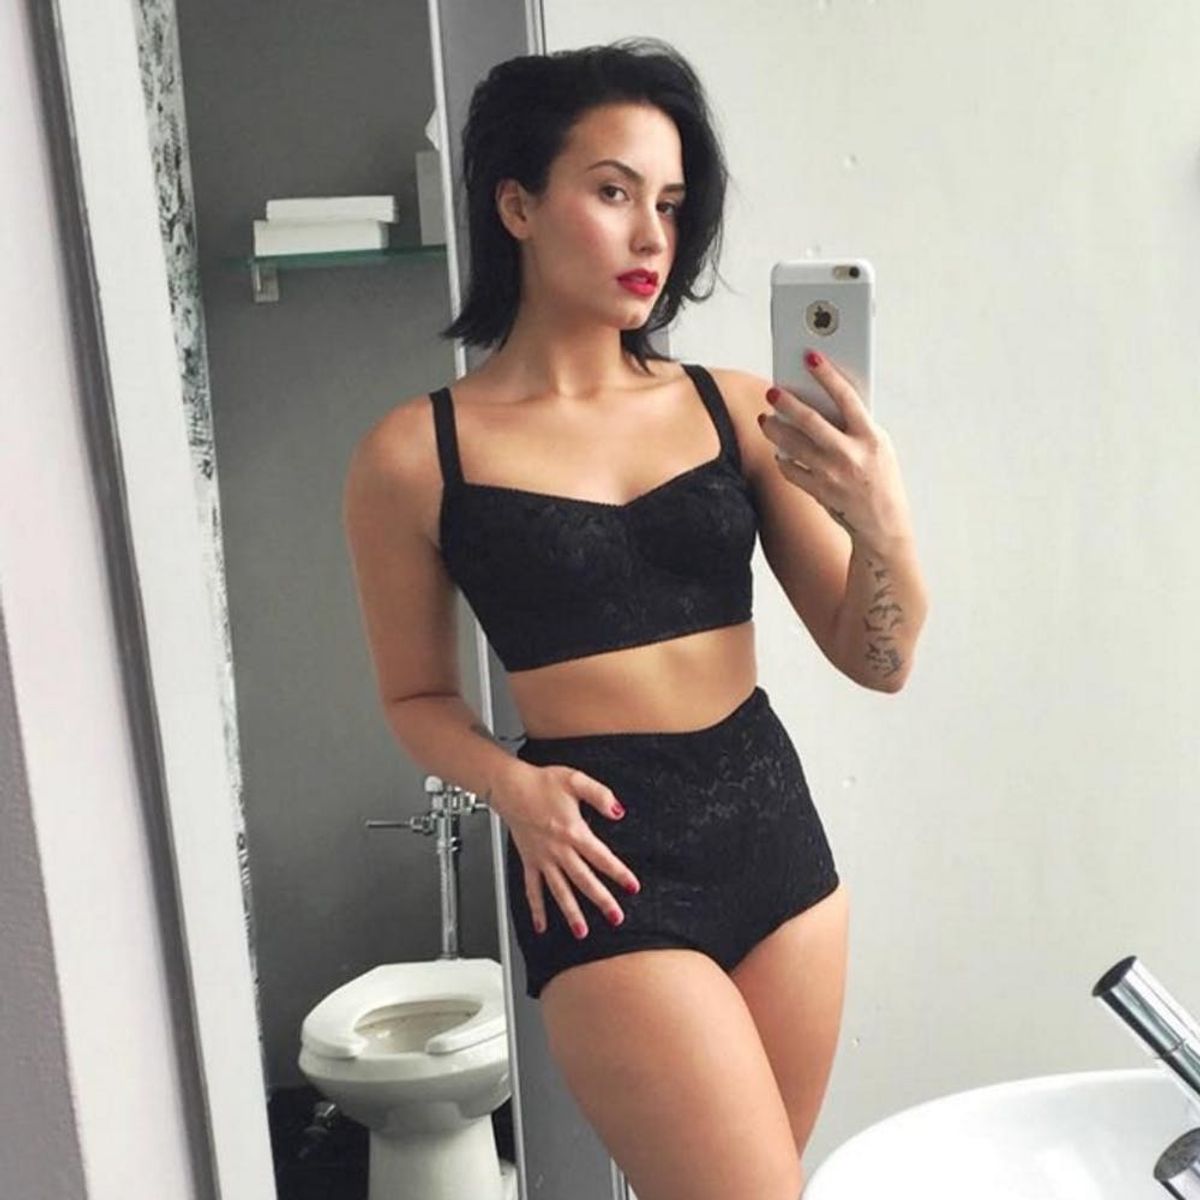 10 Body Positive Celebrities to Follow When You’re Over the Haters